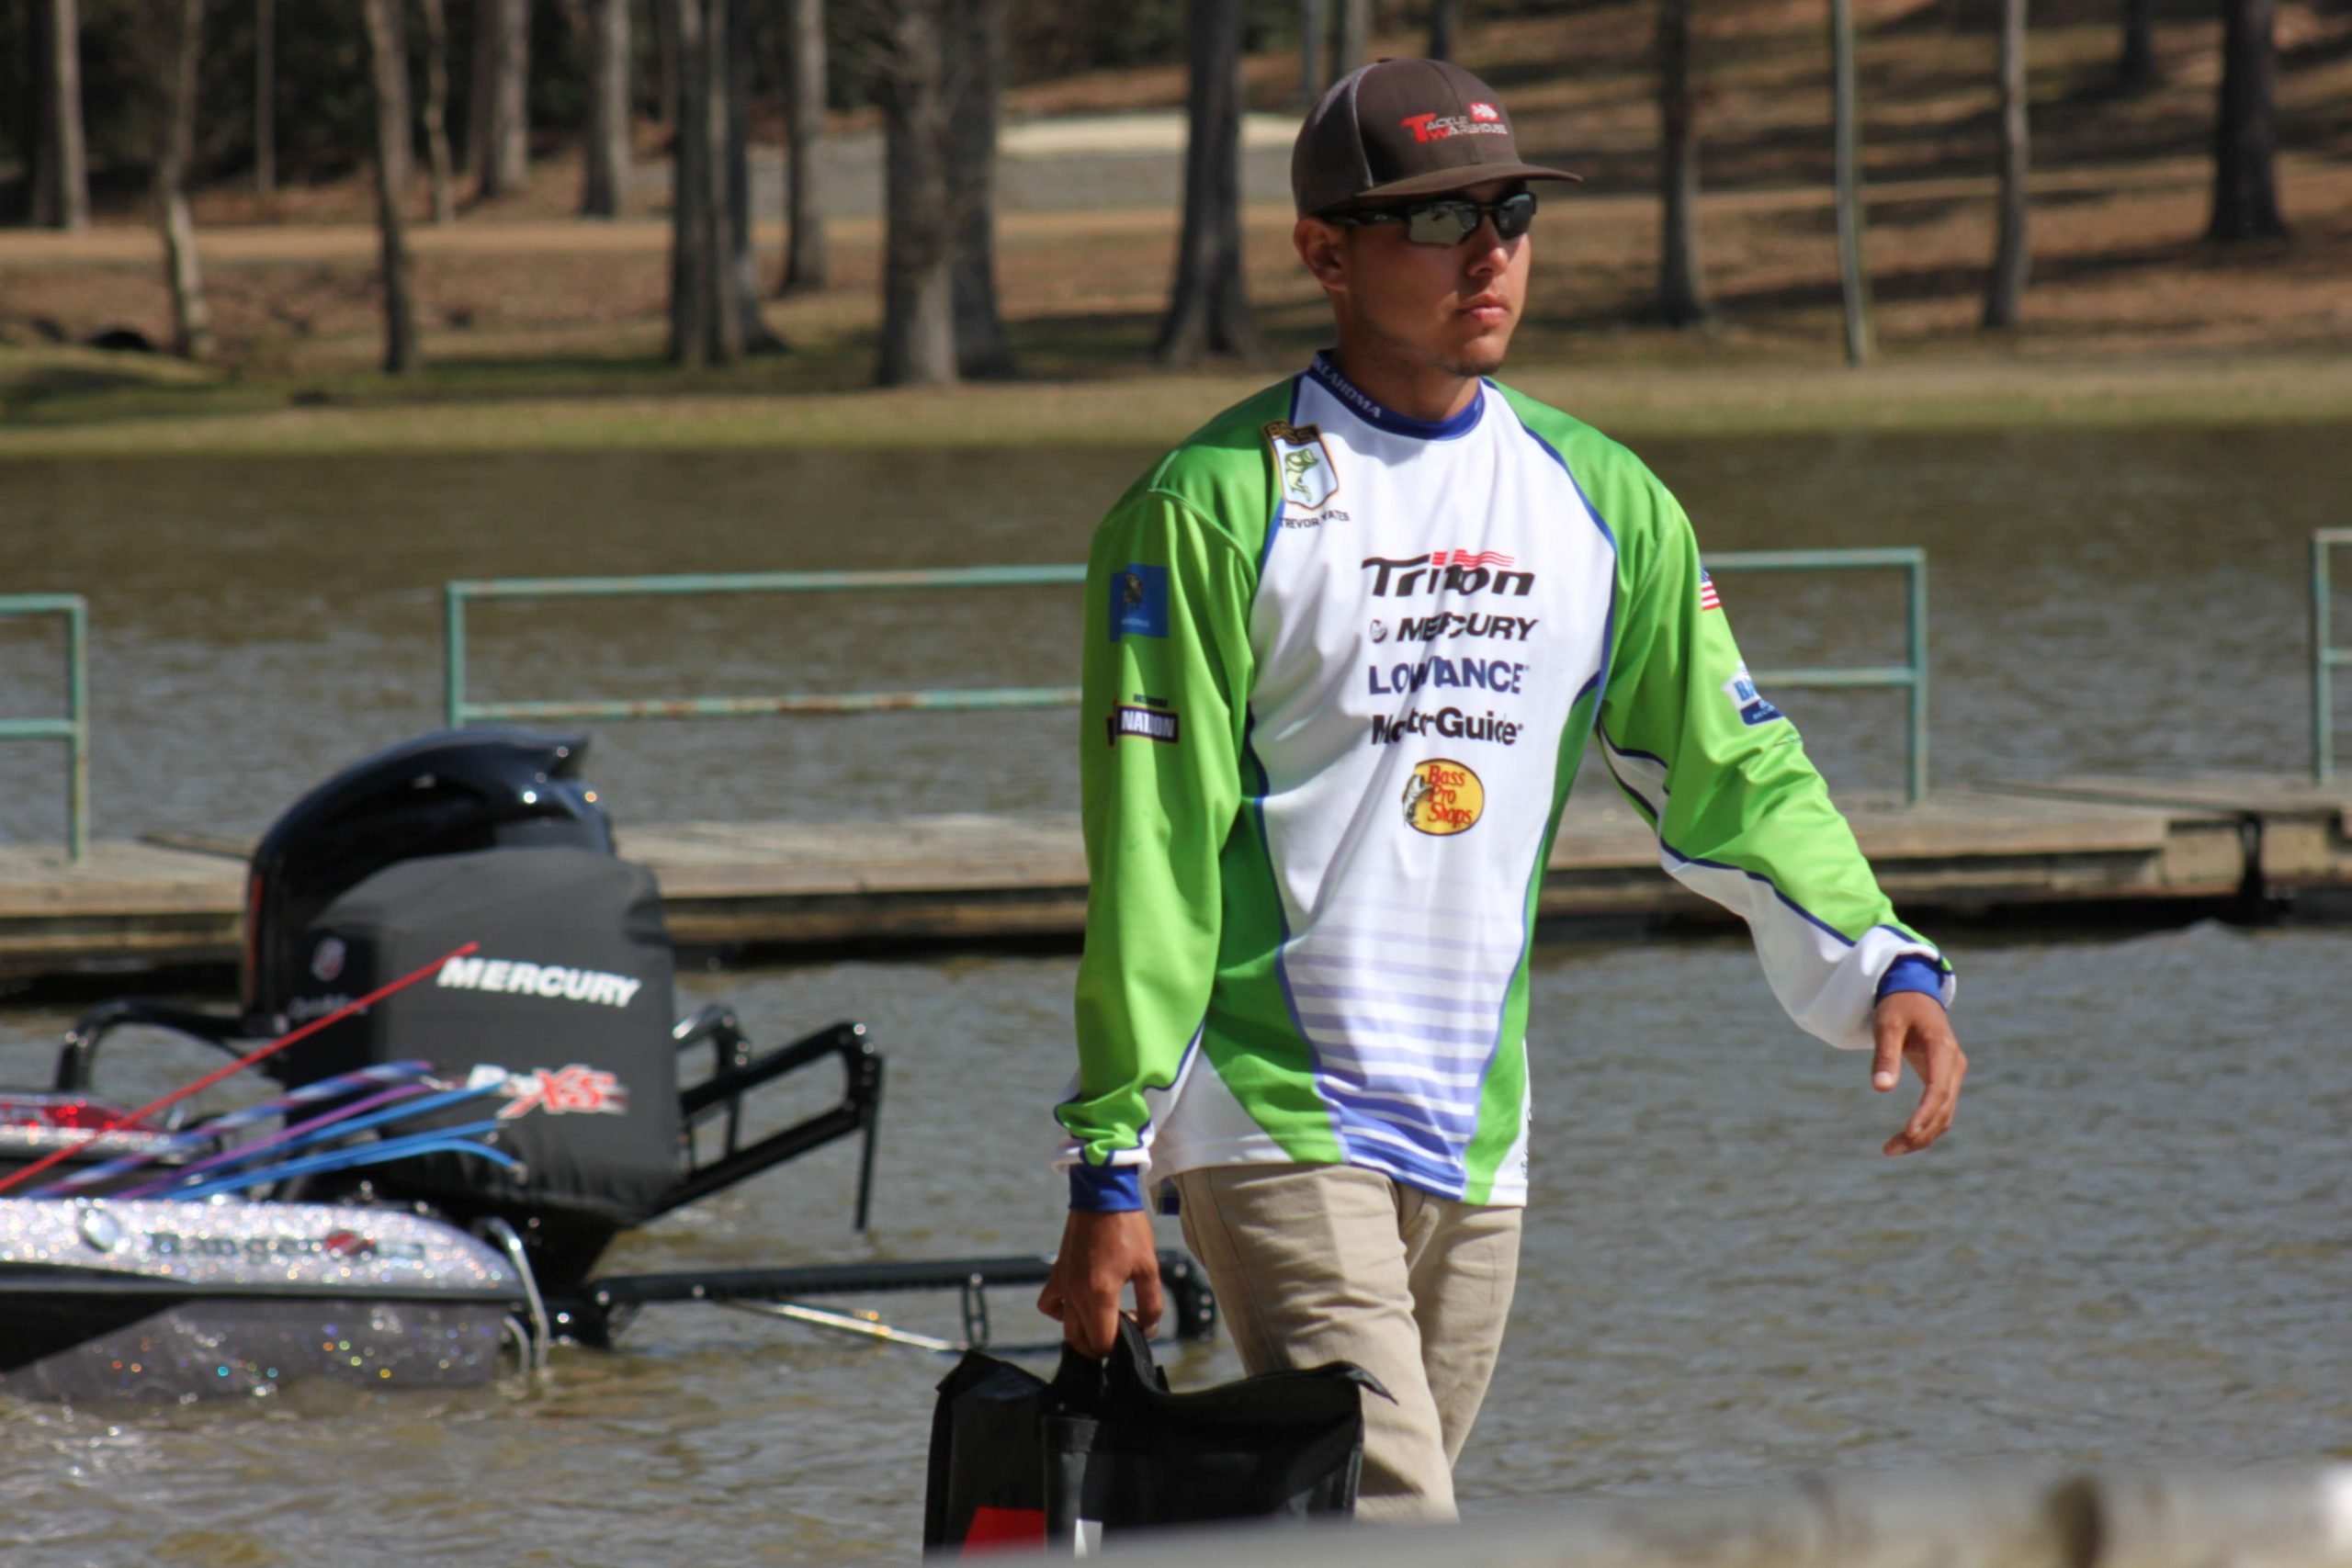 Friday marked the final day of the Academy Sports + Outdoors B.A.S.S. Nation Central Regional presented by Magellan Outdoors. The tournament began with 380 anglers from 19 different states. Of that number, 124 anglers (62 in both the boater and non-boater divisions) survived the cut to Day 3 on Toledo Bend Reservoir. Here, Oklahoma non-boater Trevor Yates totes his bag toward the check-in area.